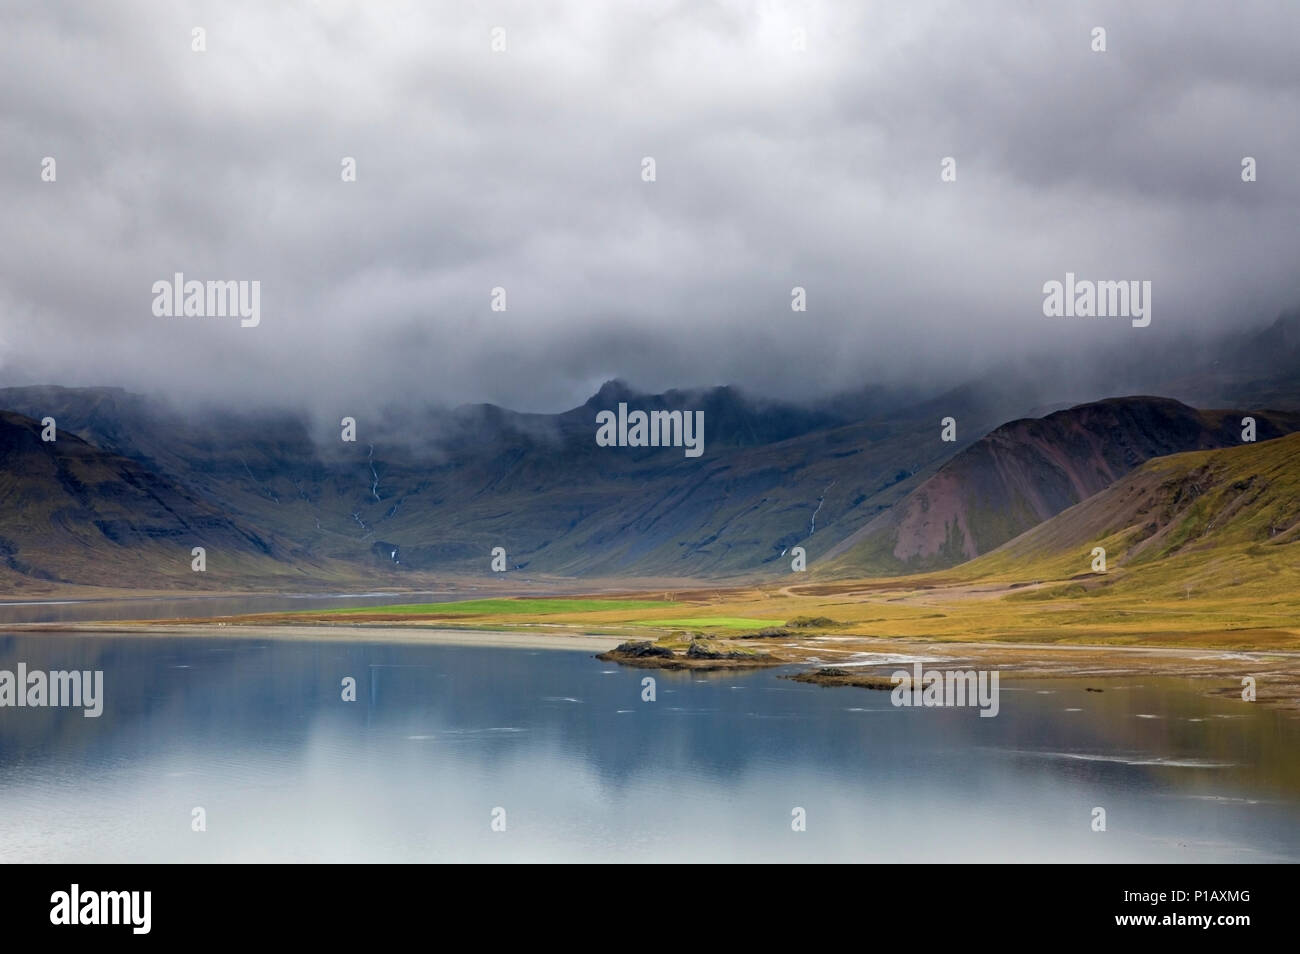 Clouds over remote landscape and water, Iceland Stock Photo